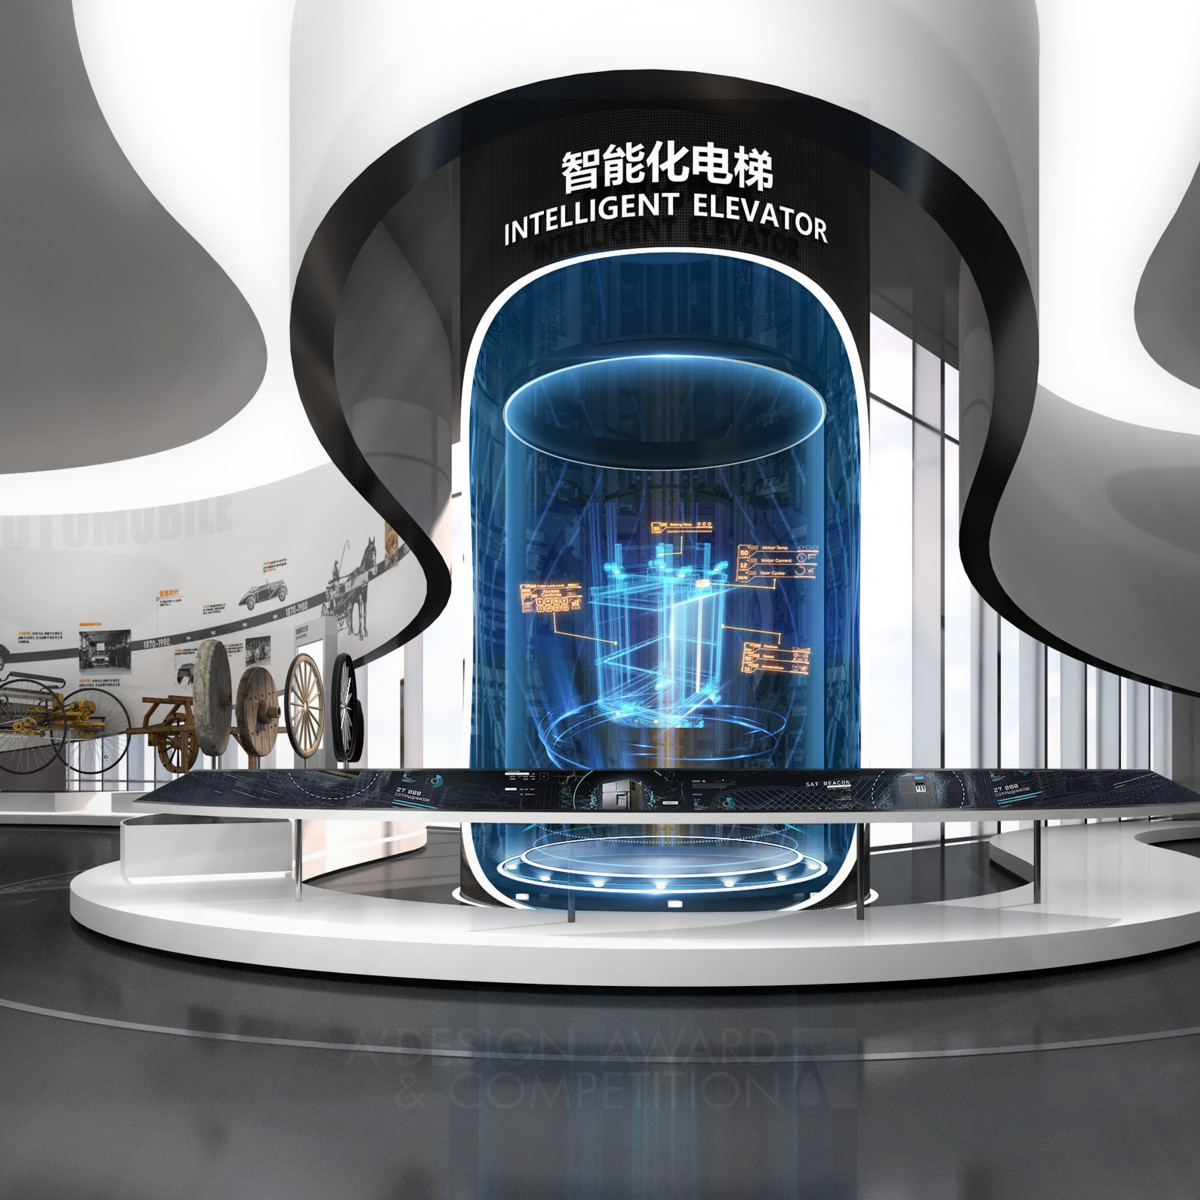 Shenzhen Iwin Visual Technology Co., Ltd wins Silver at the prestigious A' Interior Space, Retail and Exhibition Design Award with Inovance Industrial Automation Museum.